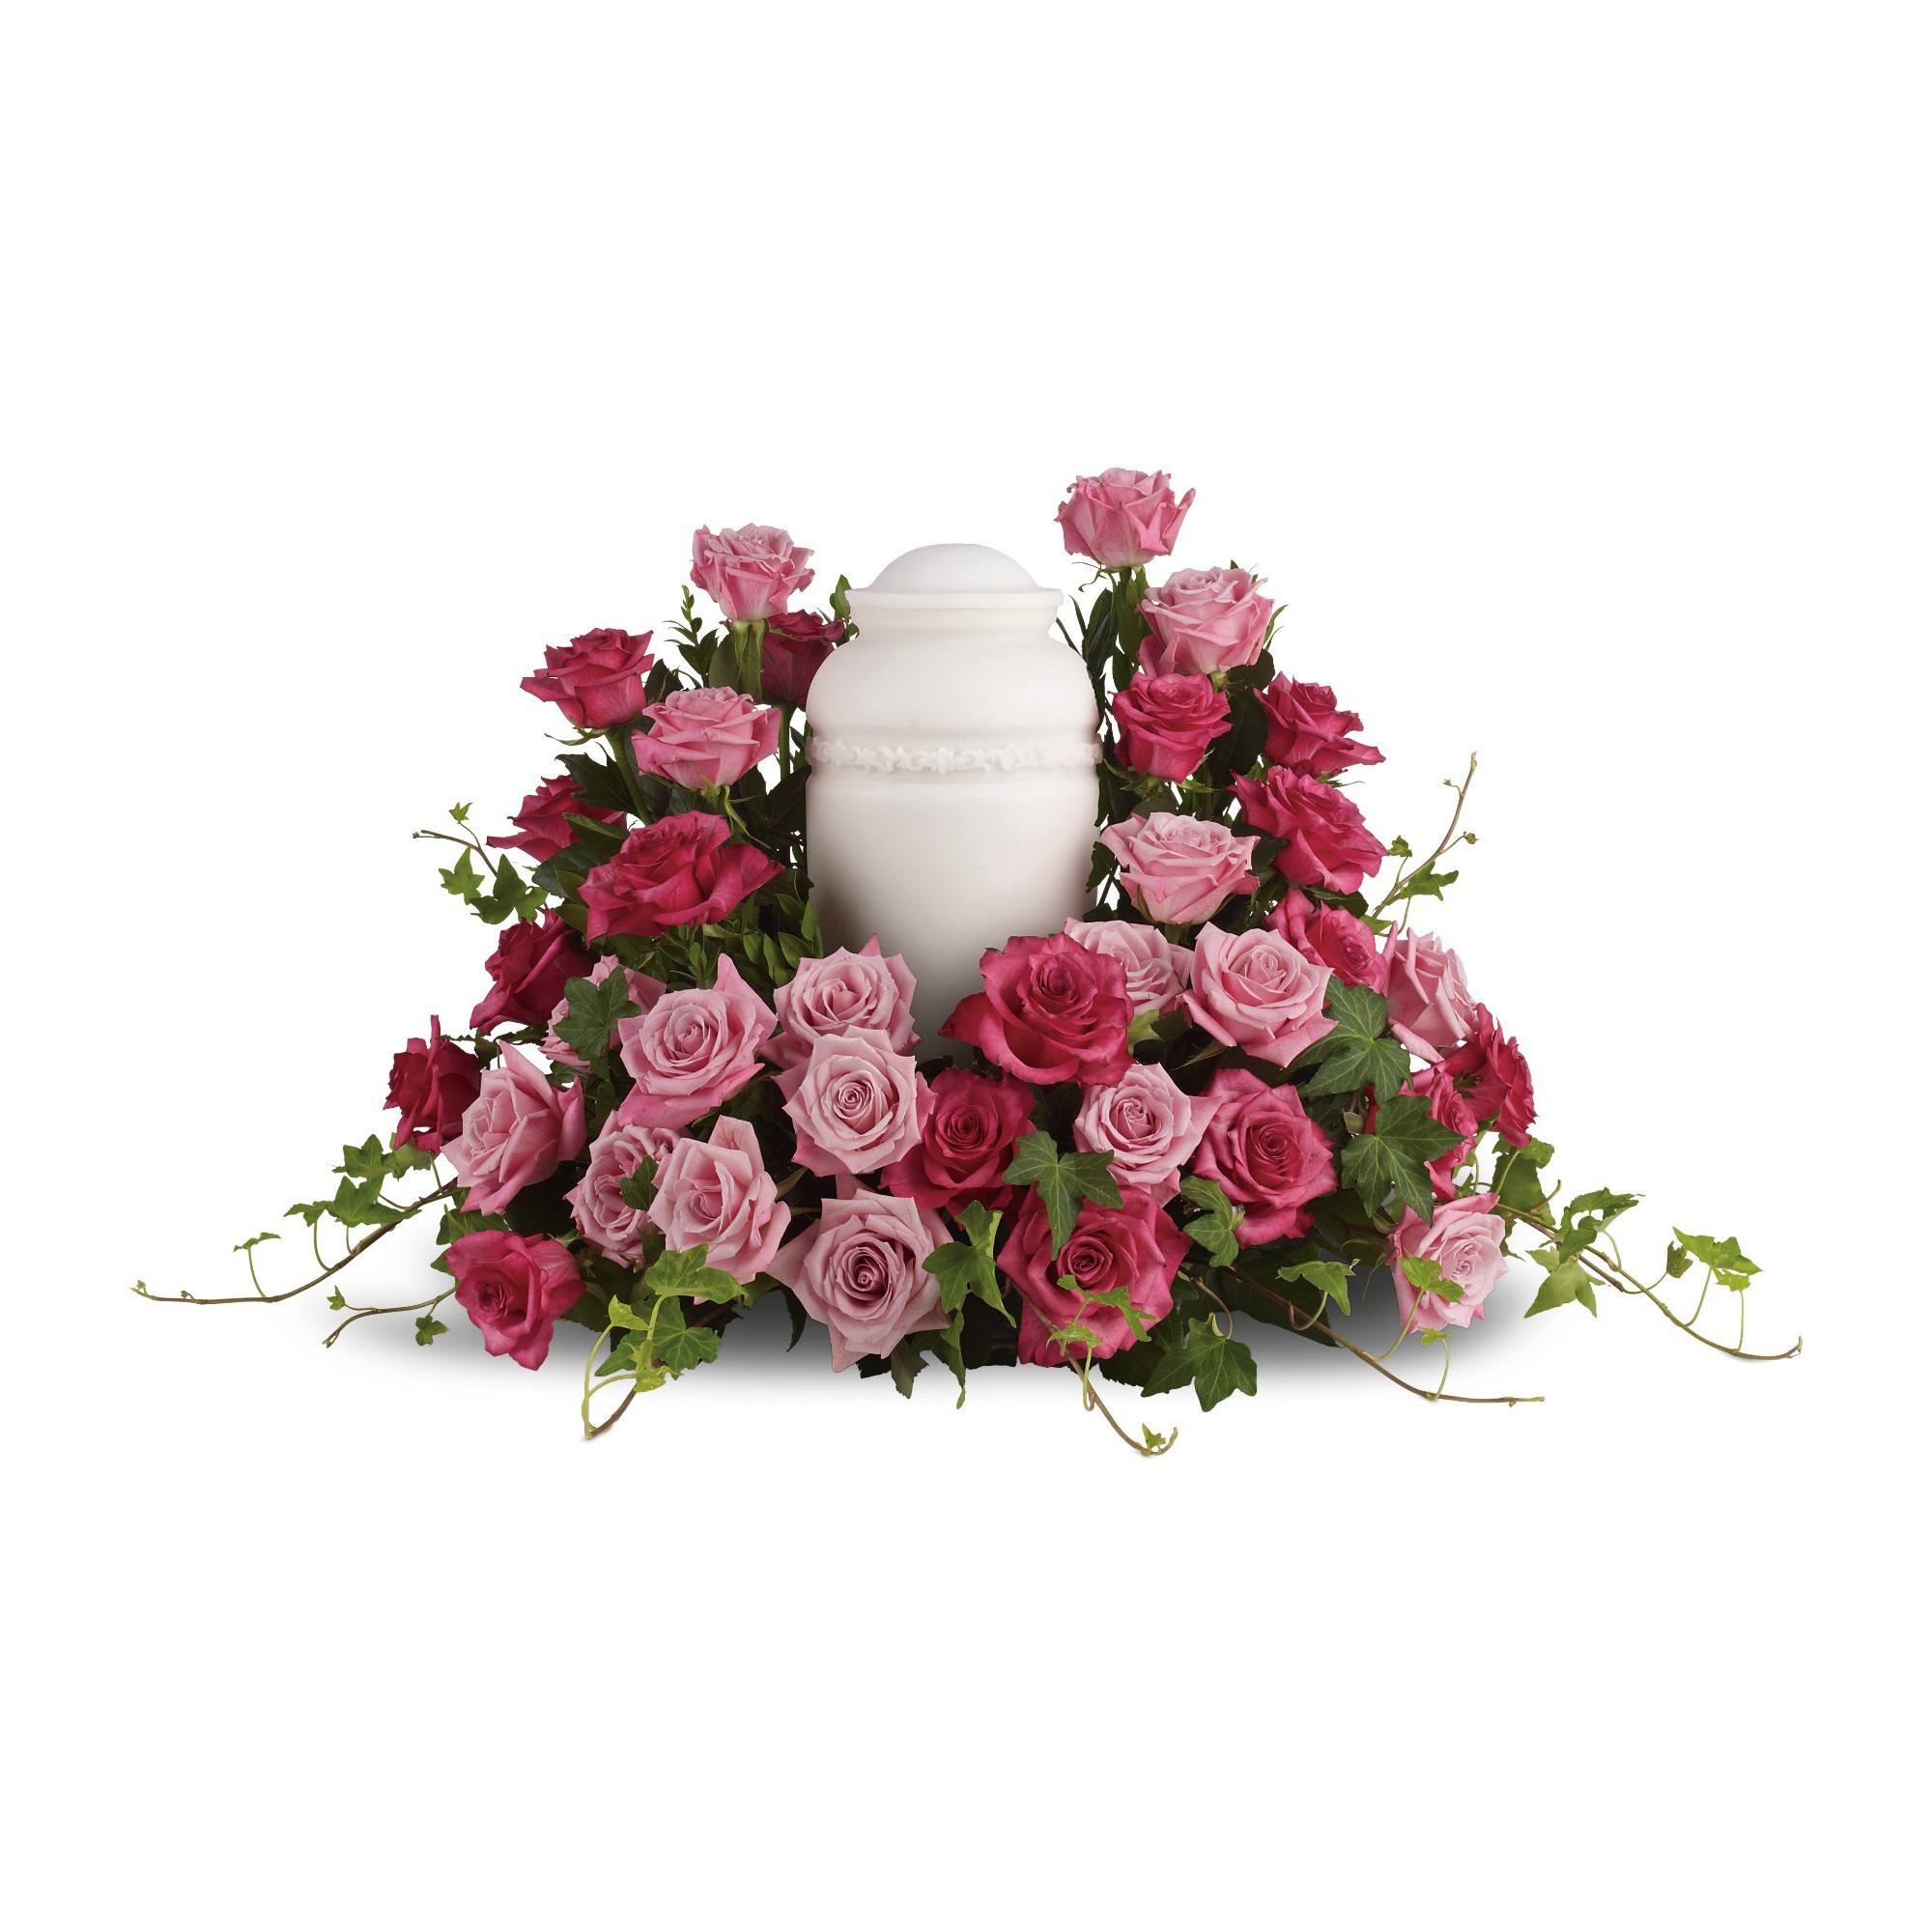 Bed of Pink Roses by Teleflora T253-2A in Glenside, PA | Penny's Flowers